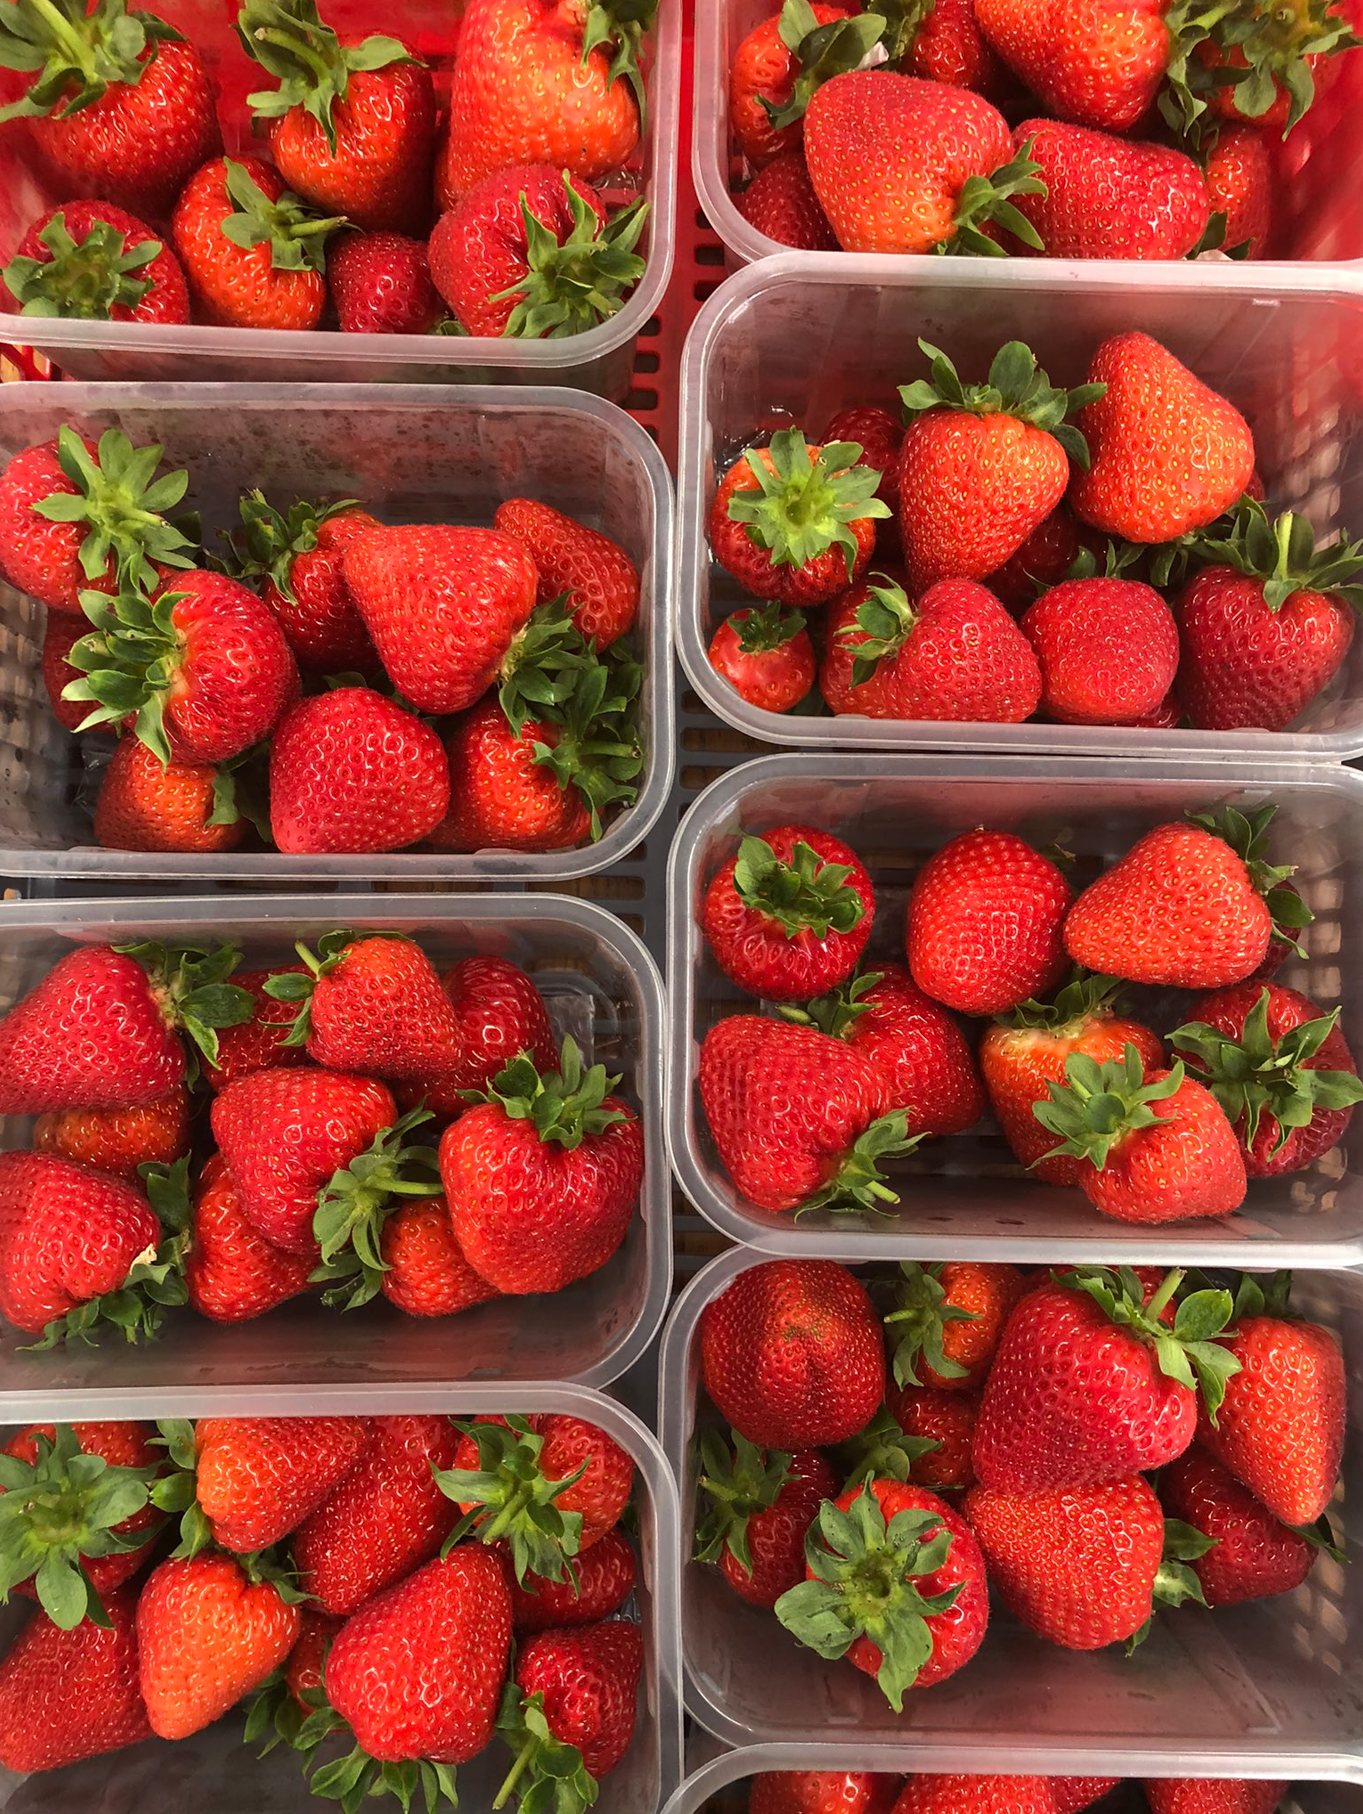 Image of punnets of red strawberries